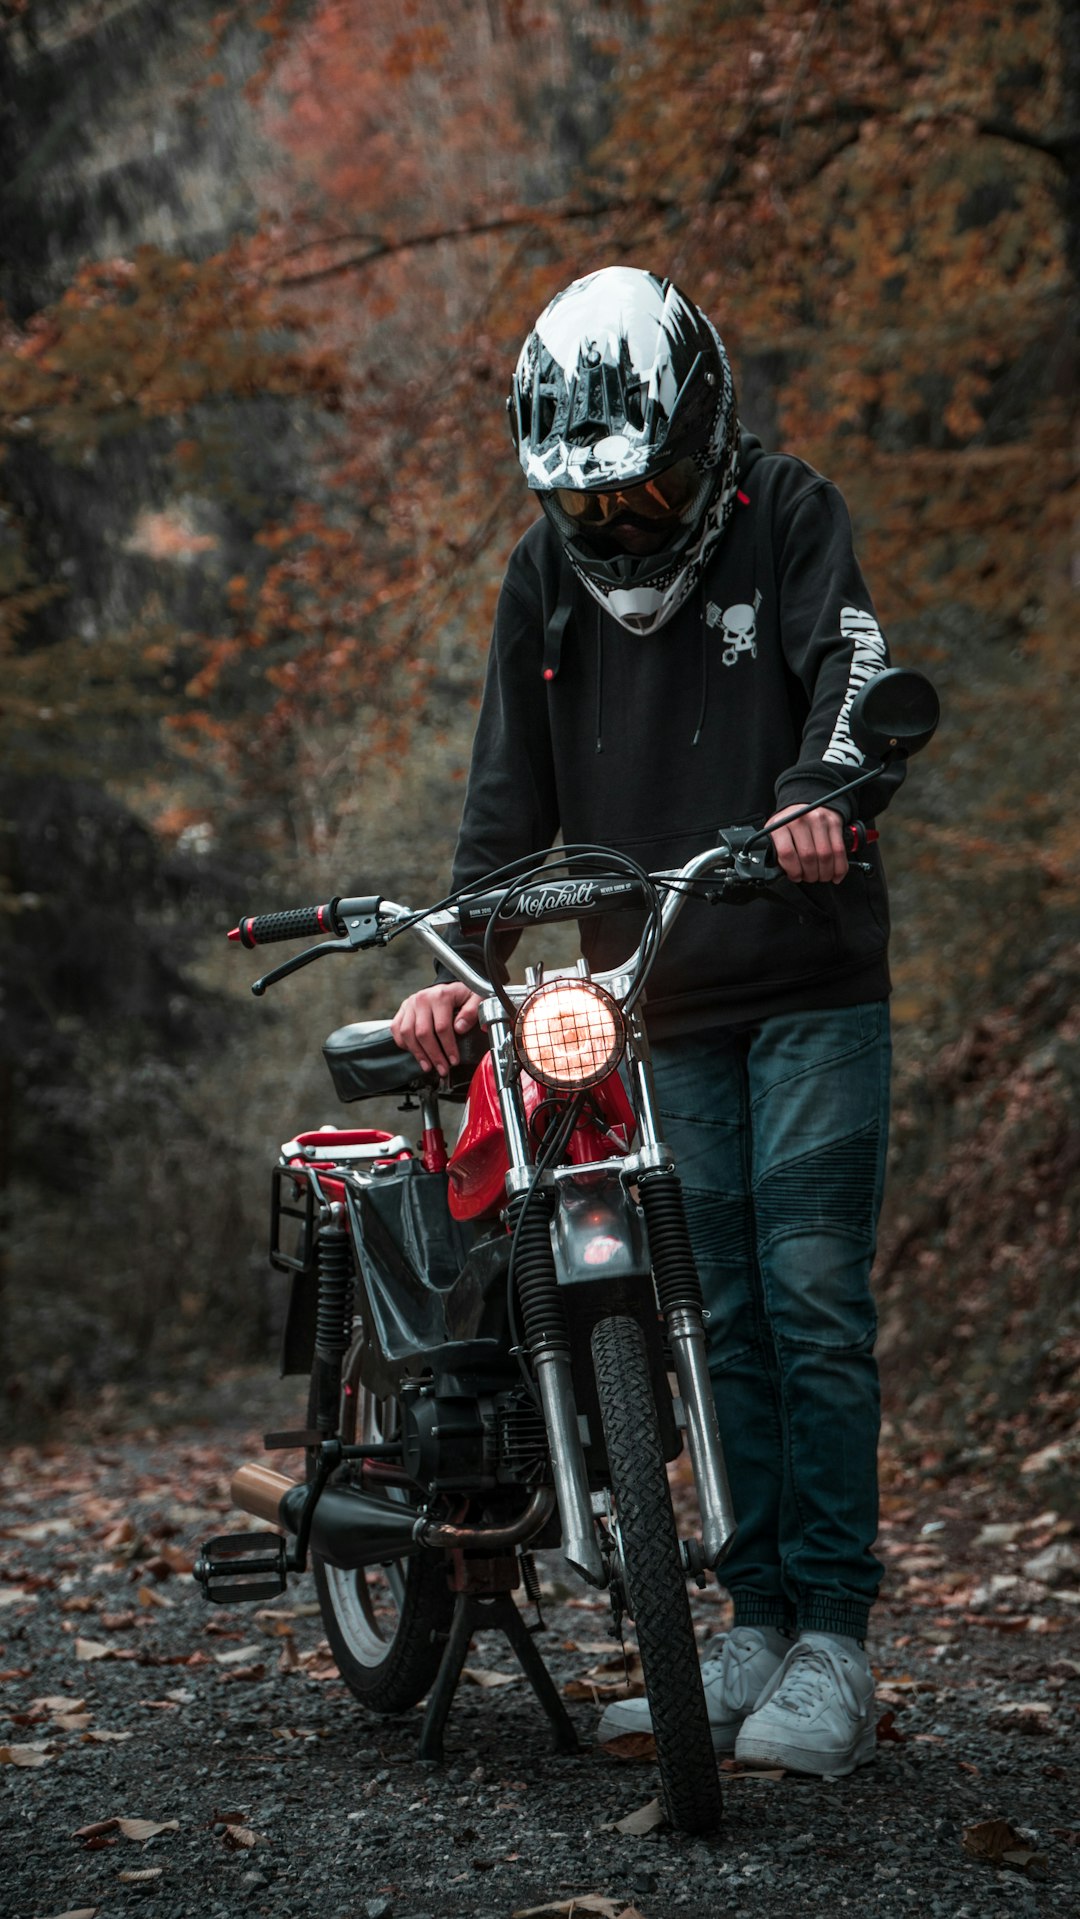 red and black motorcycle